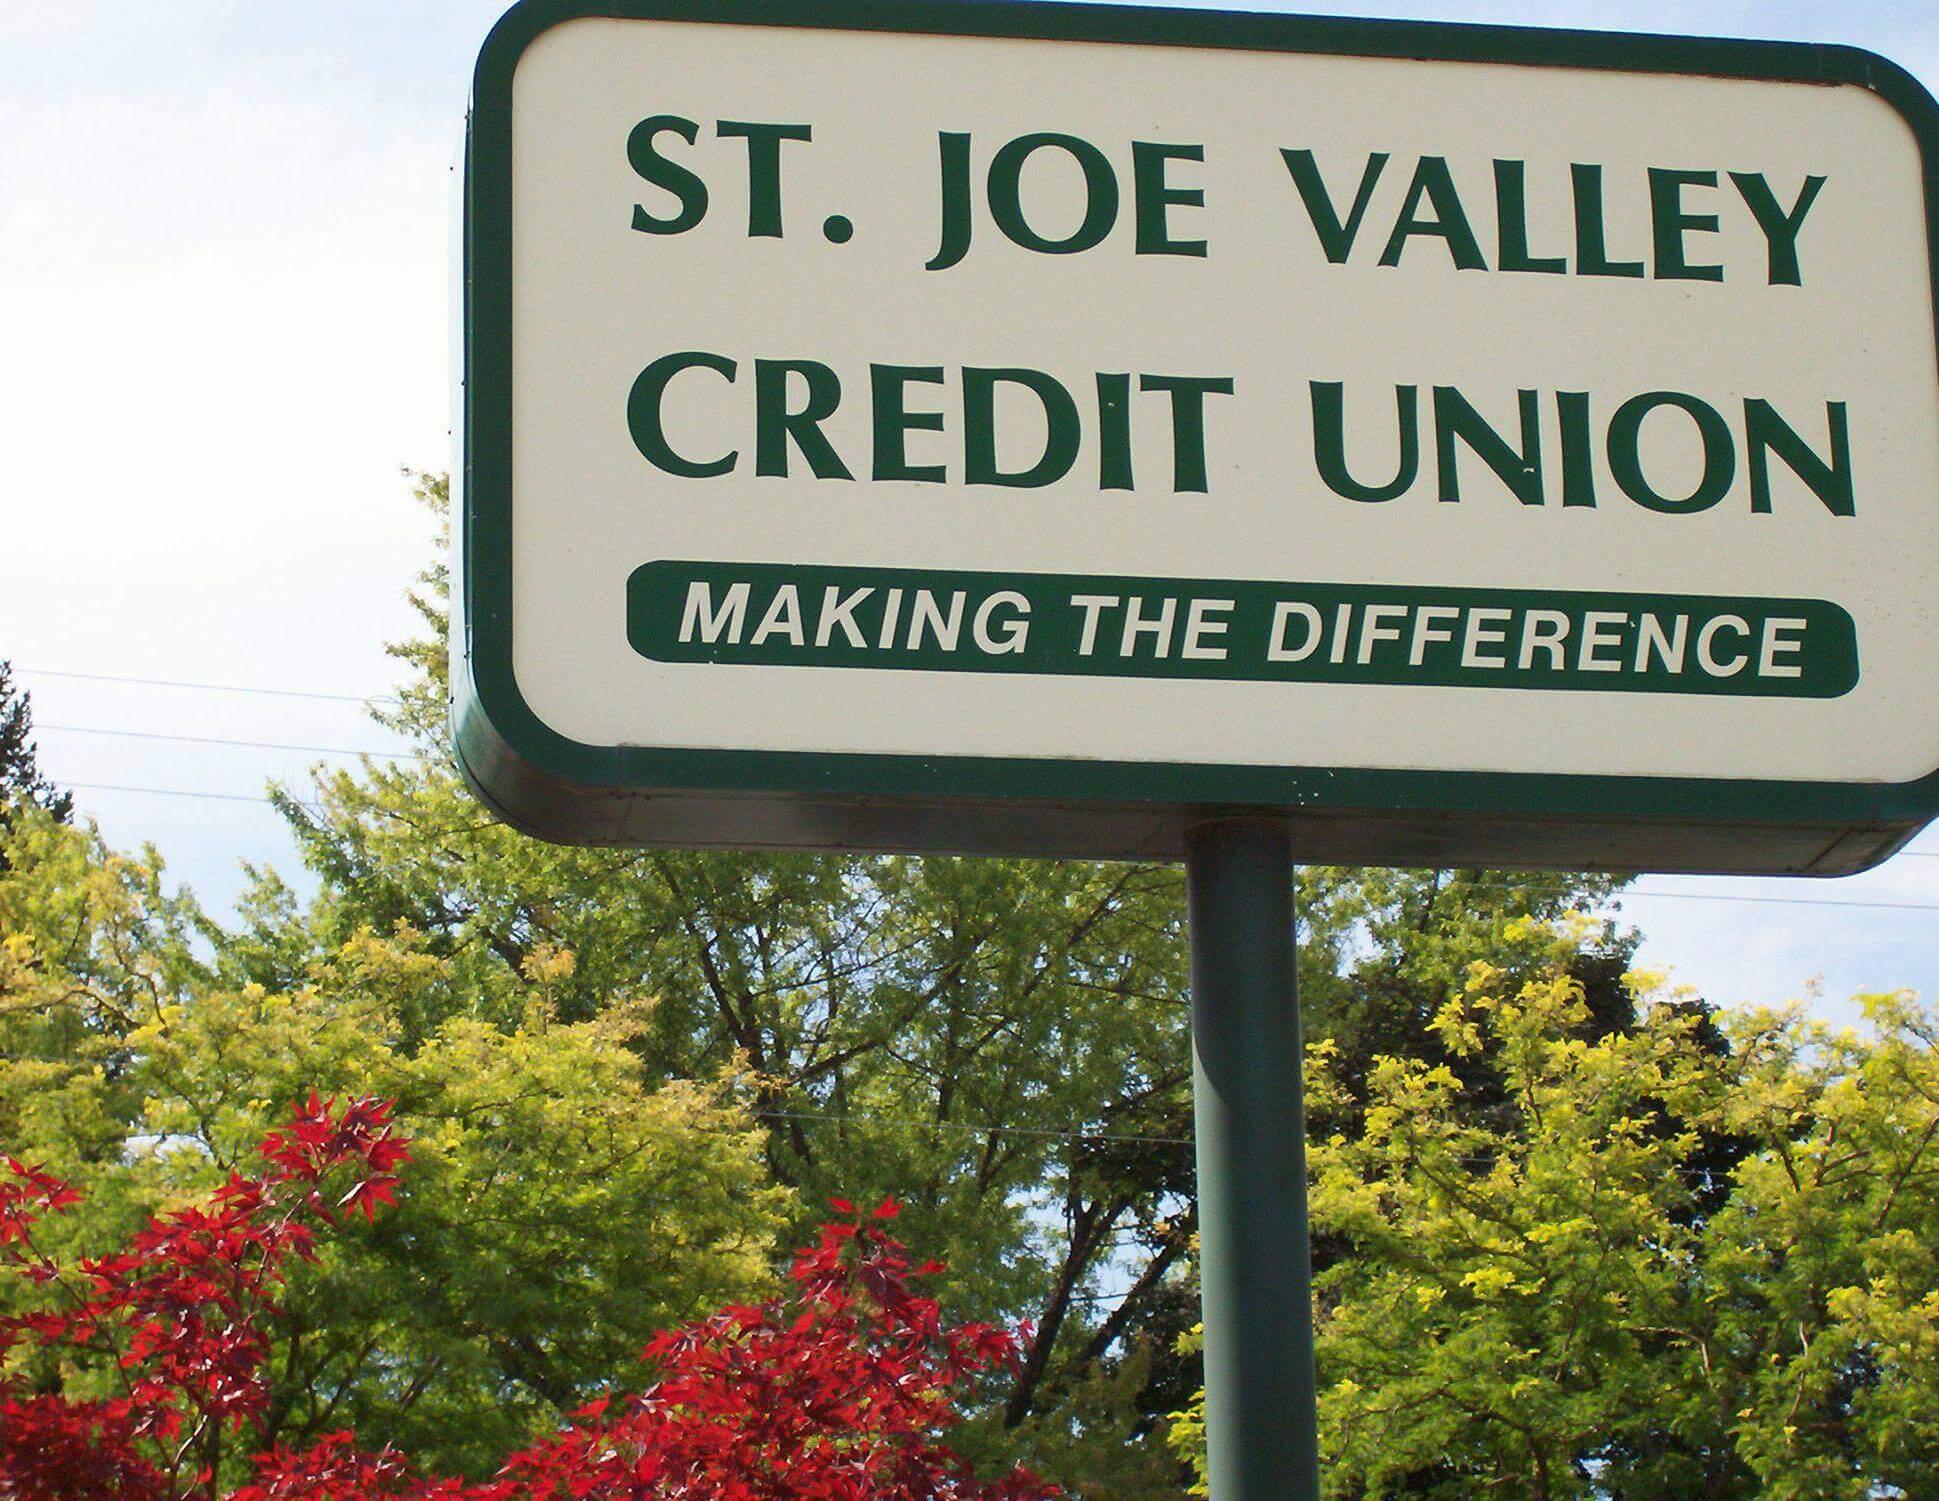 About St. Joe Valley Credit Union